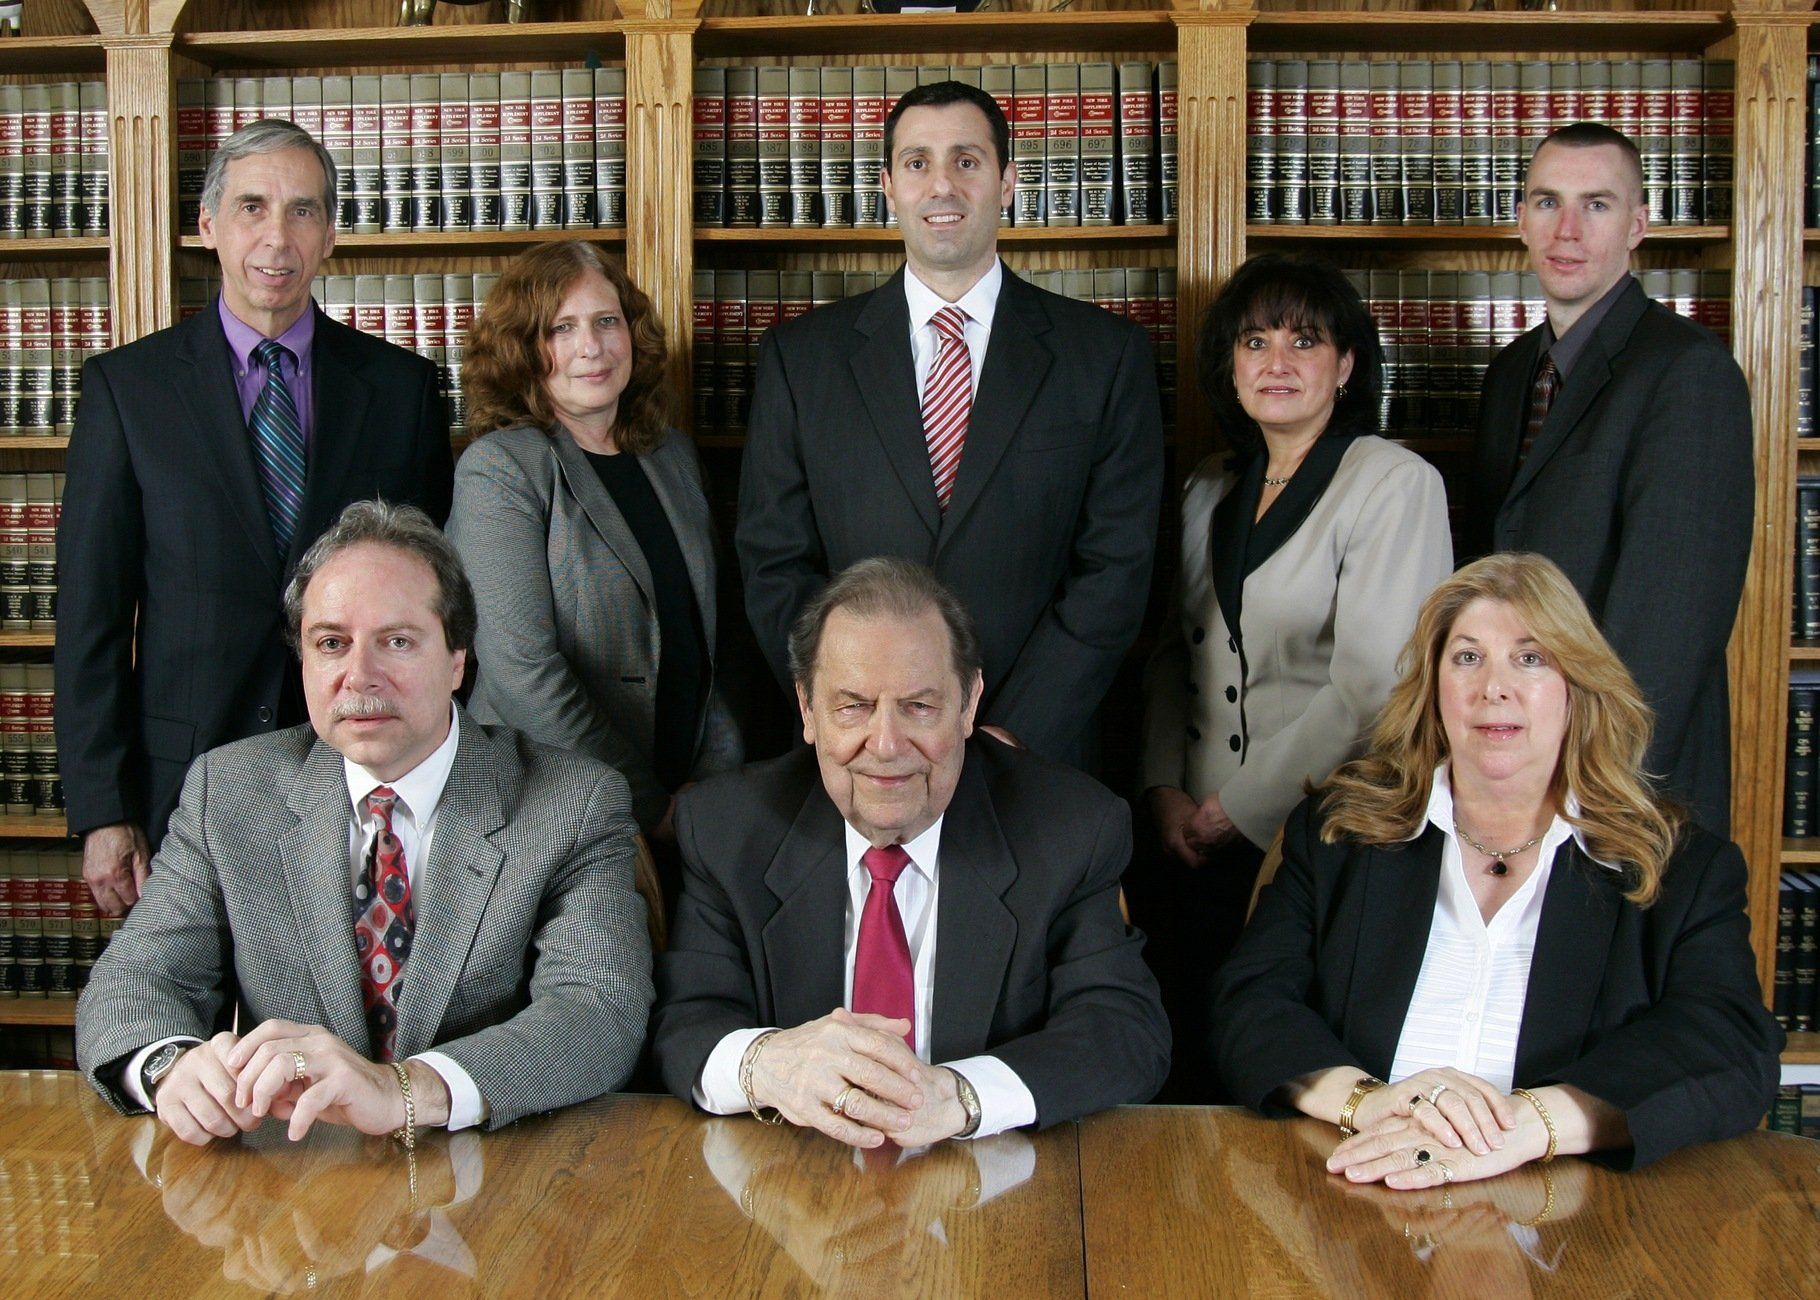 Accident Lawyers, Car Accident Lawyers, Personal Injury Attorneys